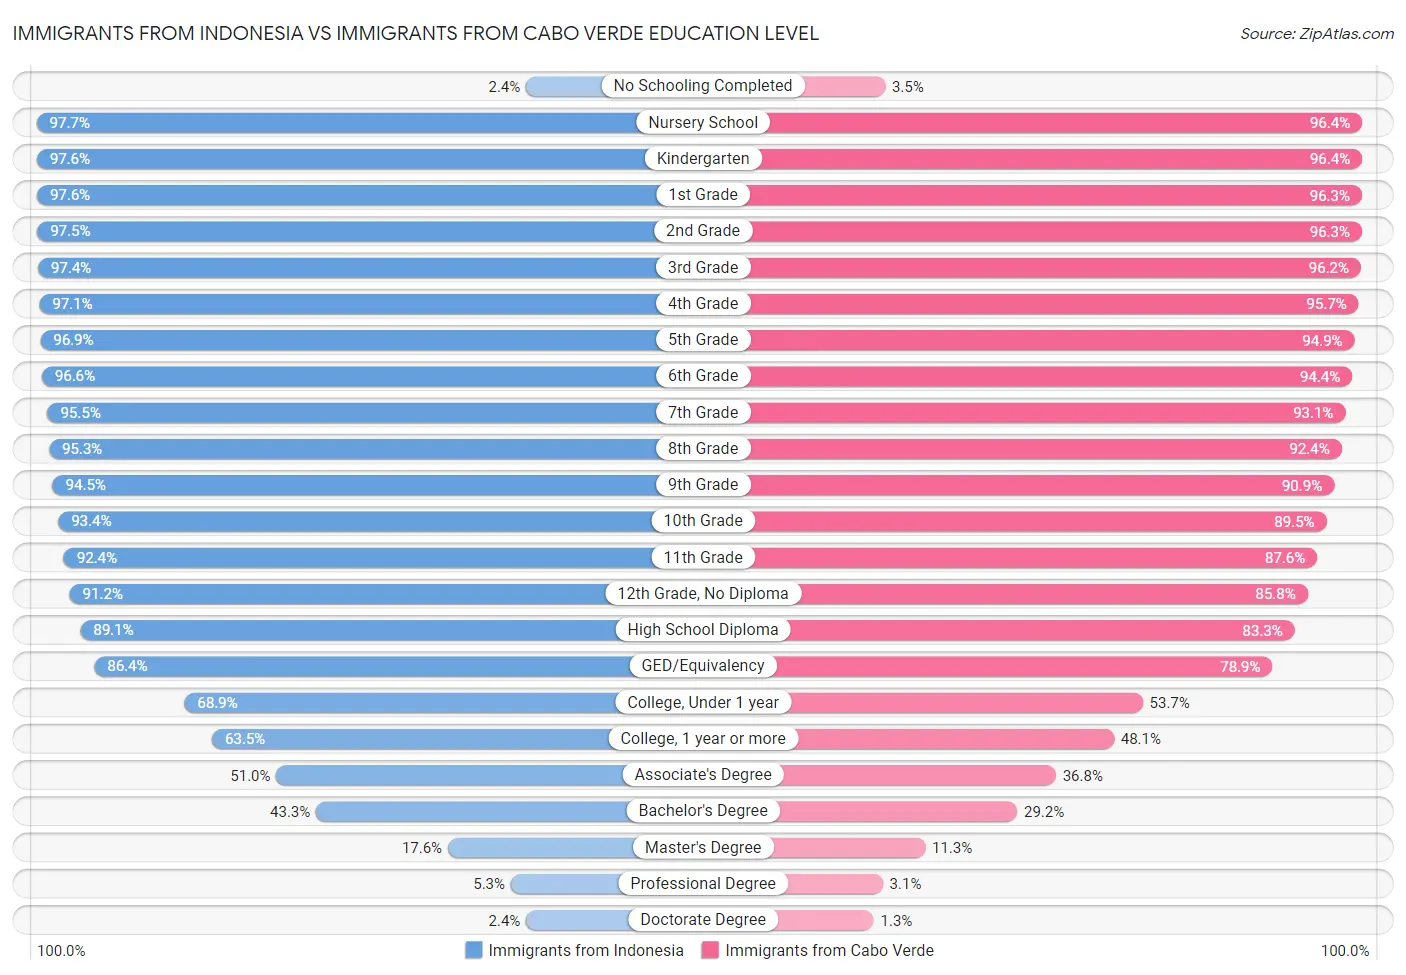 Immigrants from Indonesia vs Immigrants from Cabo Verde Education Level